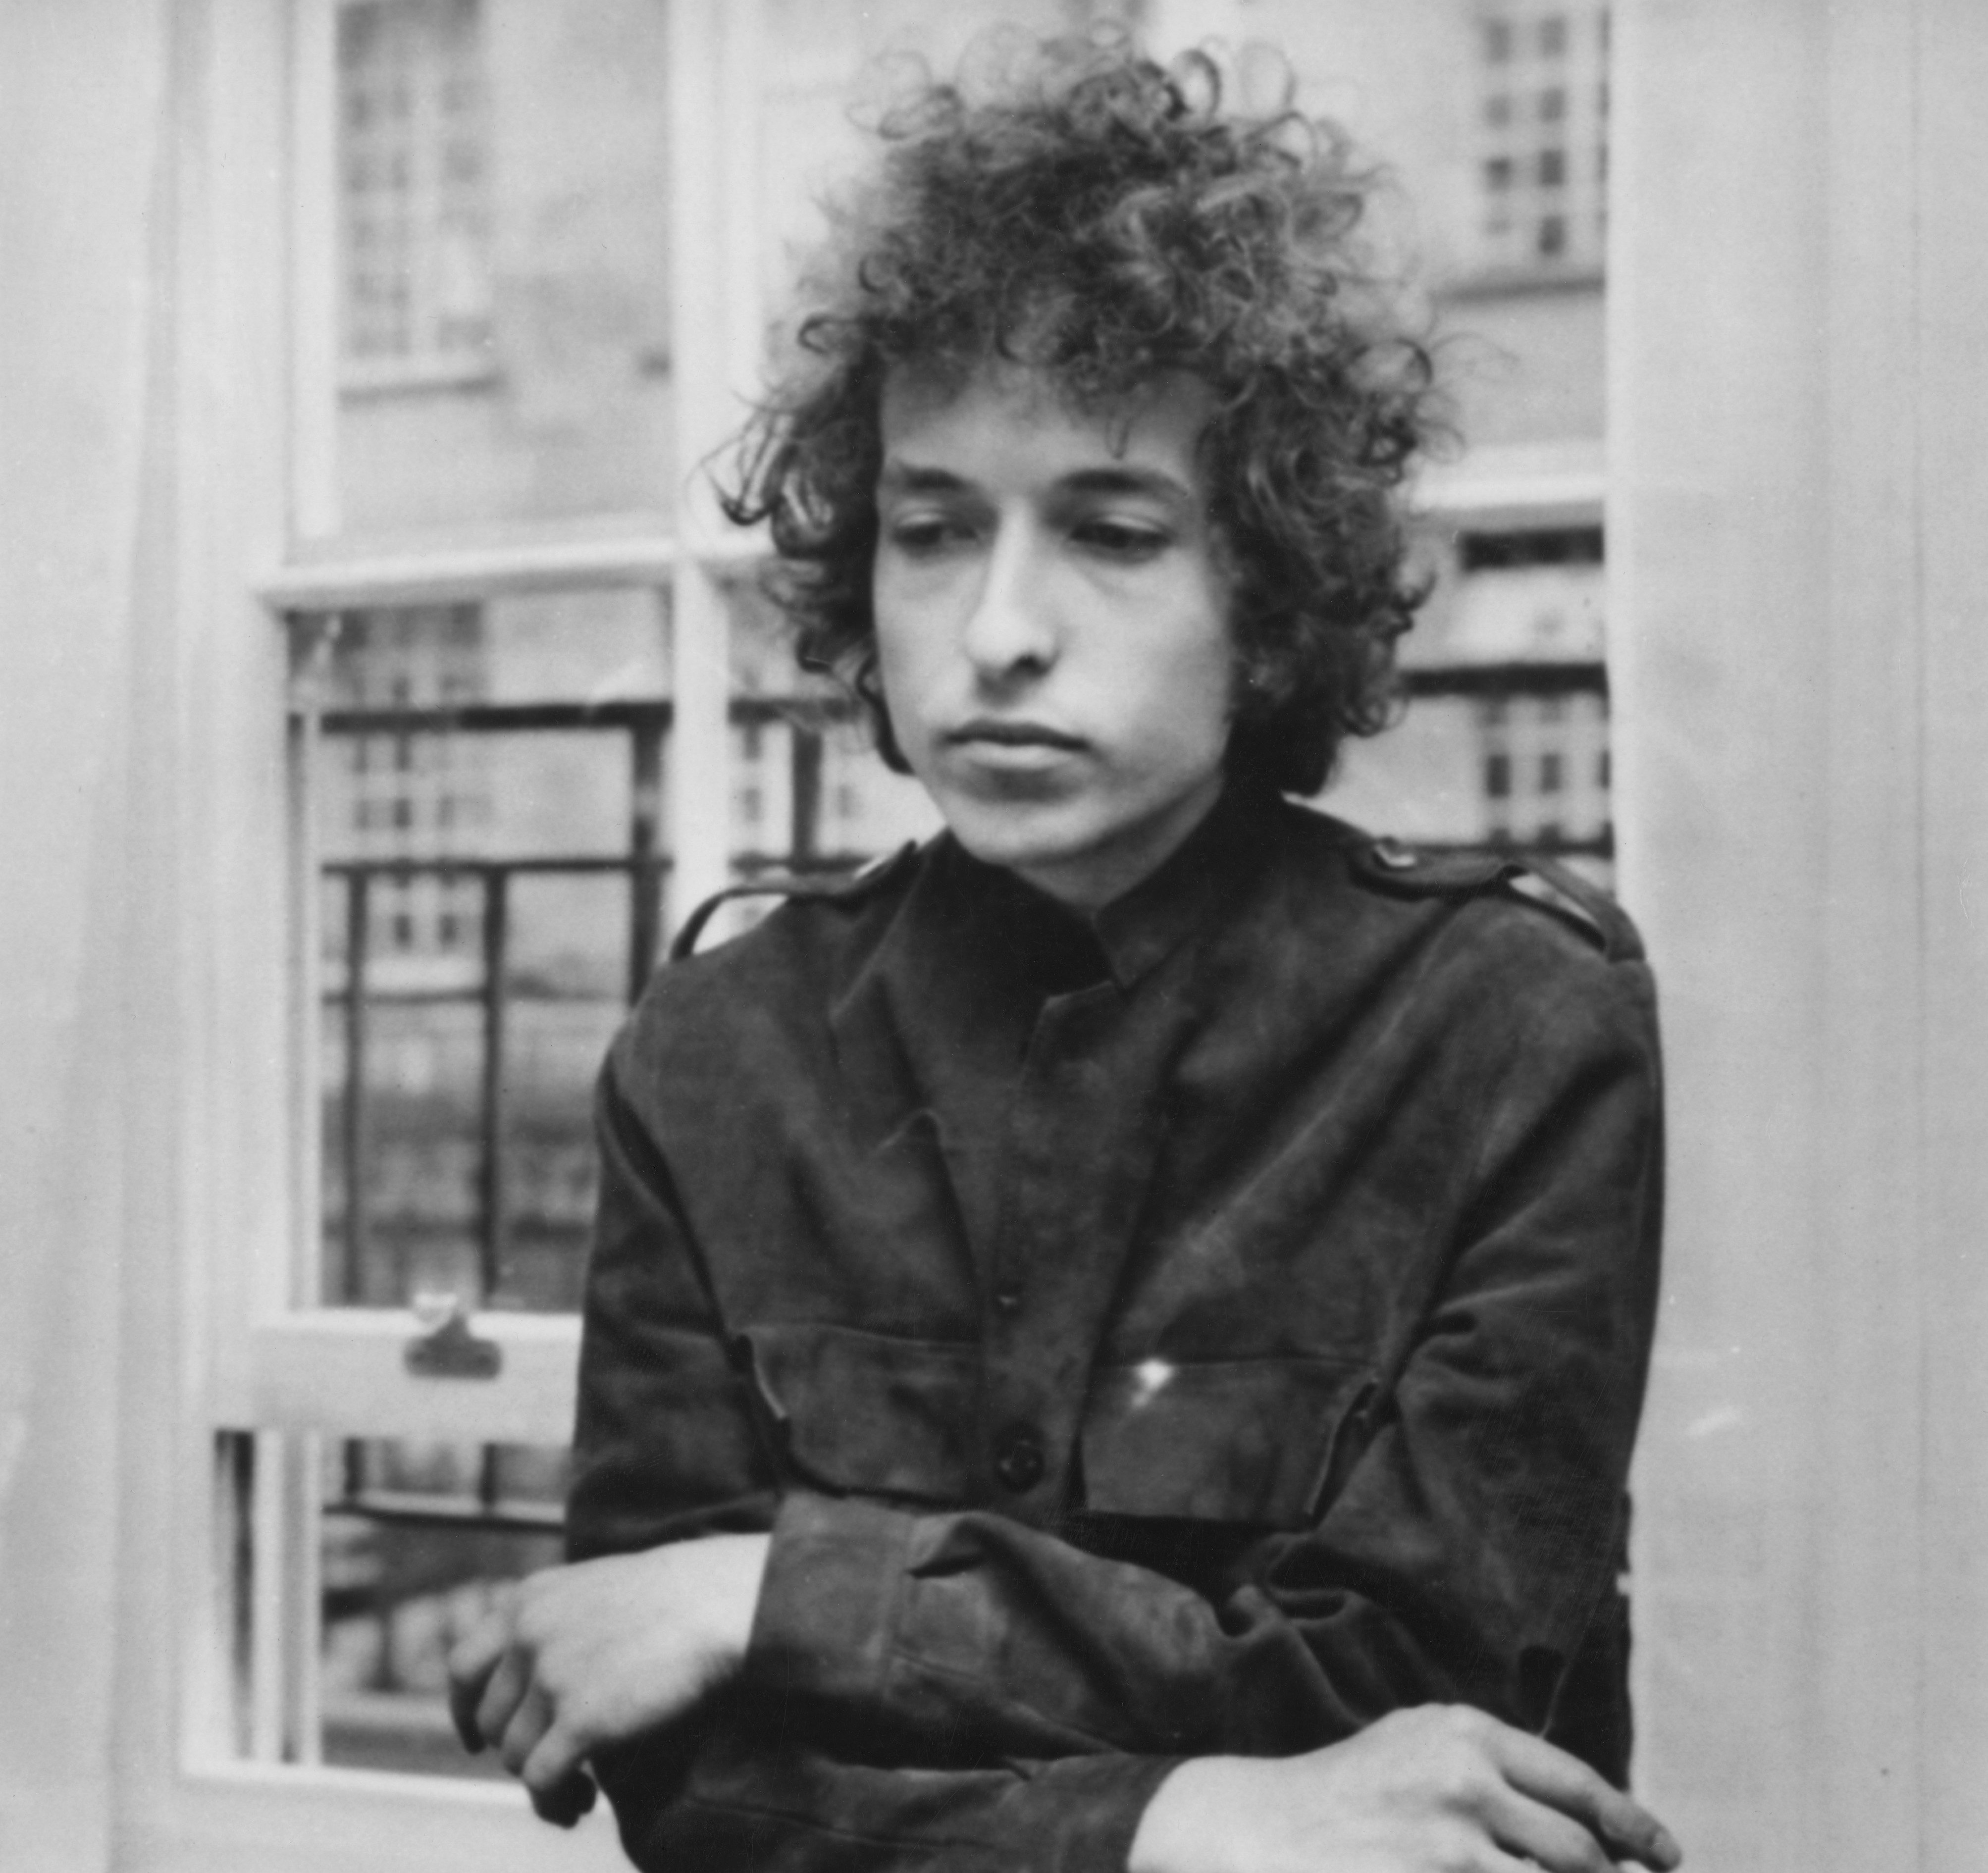 A black and white picture of Bob Dylan standing in front of a mirror with his arms folded.